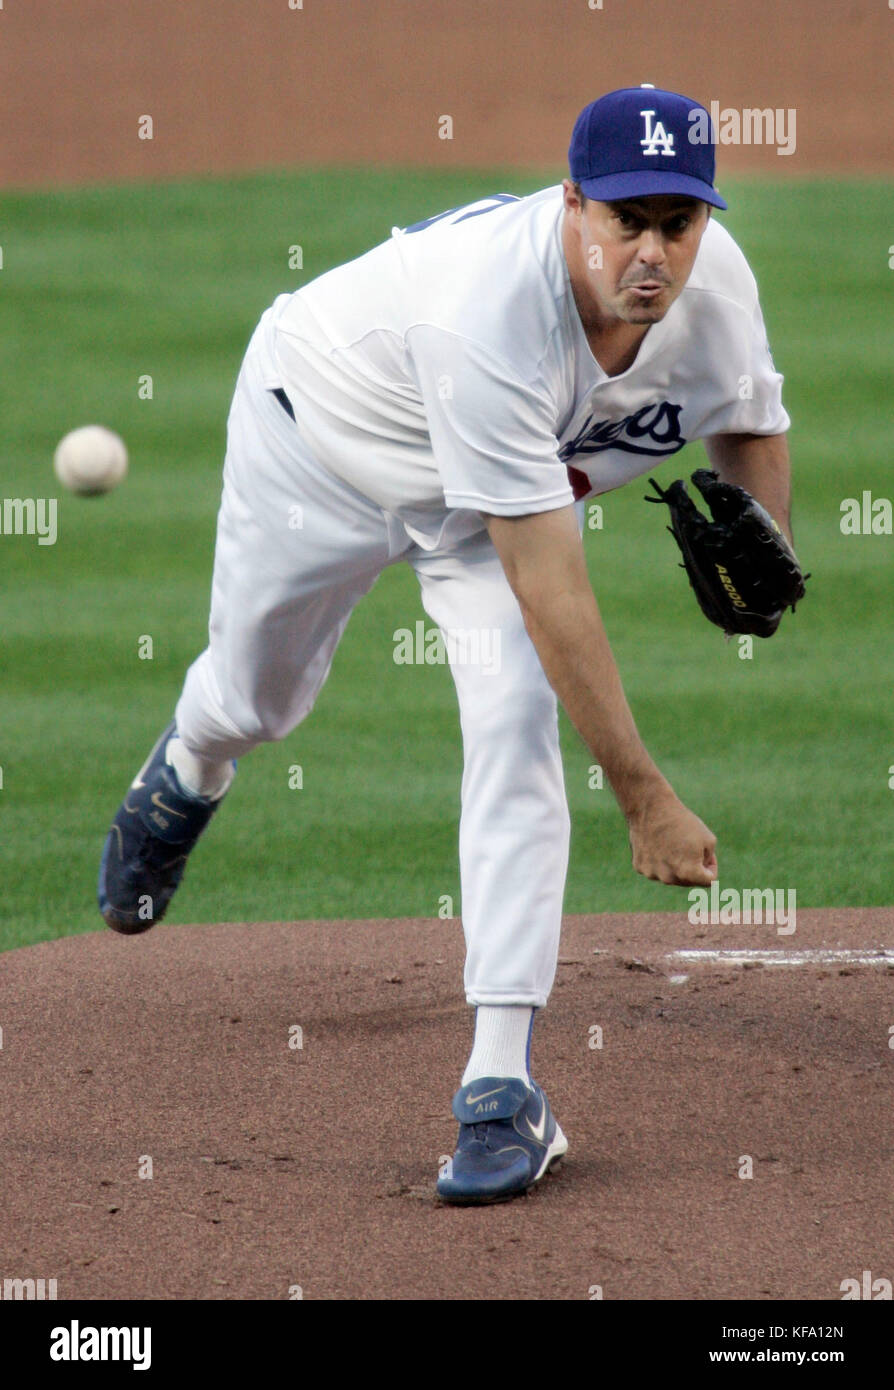 Los Angeles Dodgers' Greg Maddux pitches against the New York Mets in the first inning of game 3 of the NLDS baseball series  in Los Angeles on Saturday, October 7, 2006. Photo by Francis Specker Stock Photo